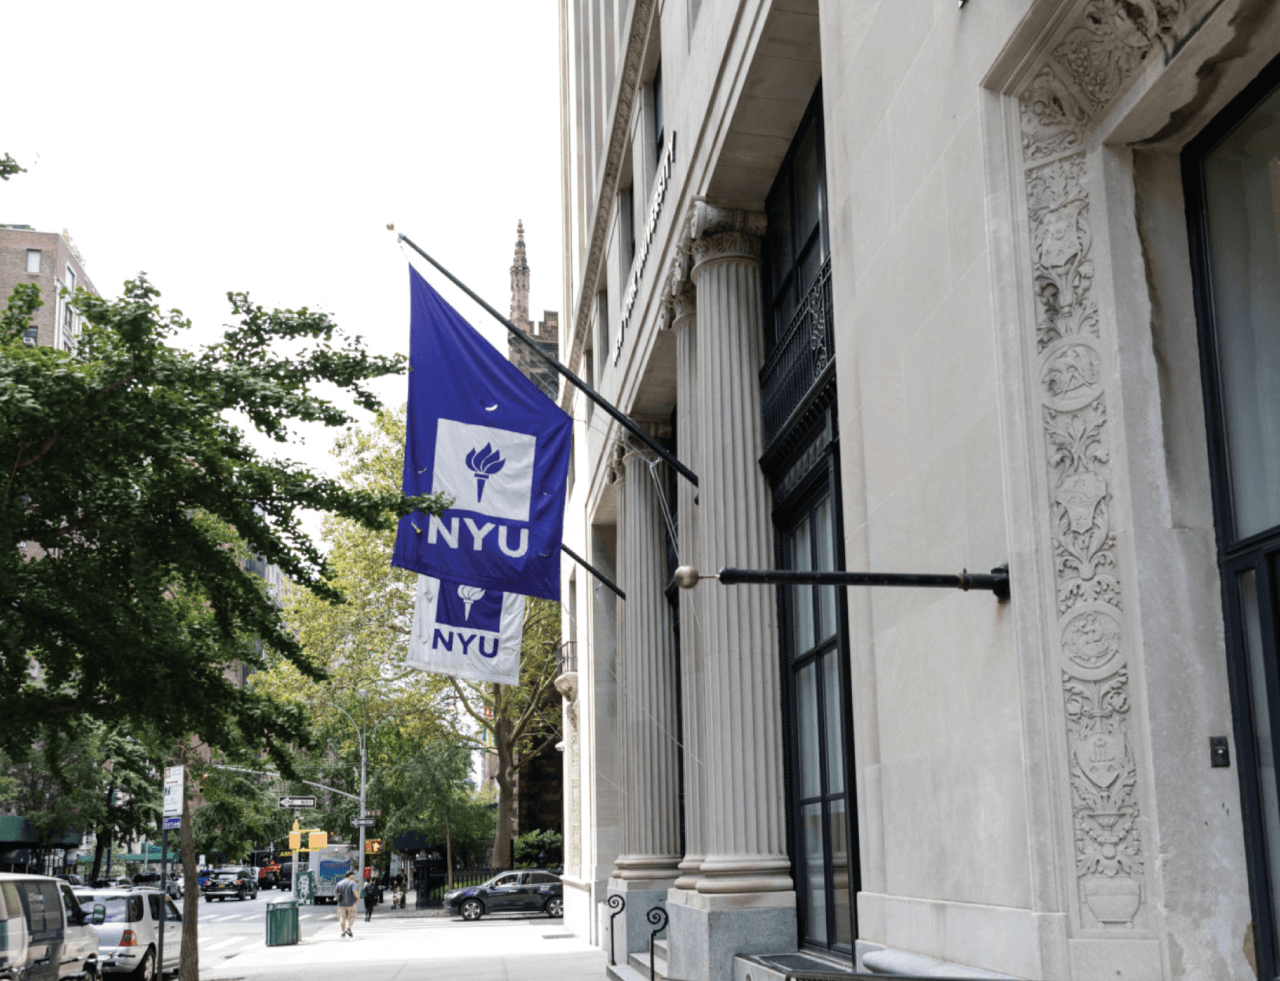 Flags hanging from NYU building